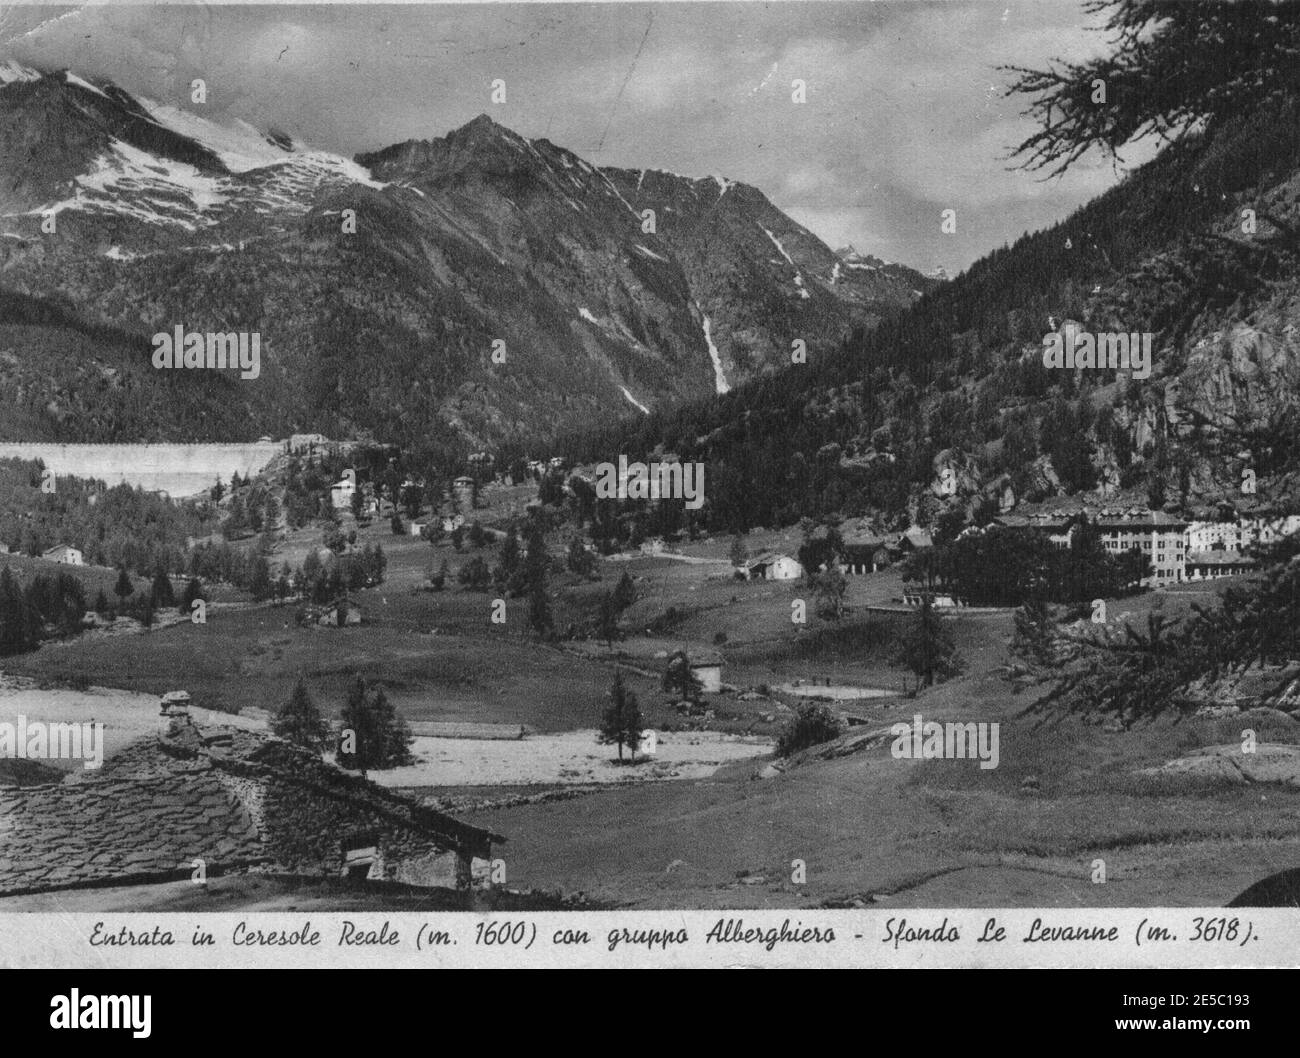 Postalcard of Ceresole Reale National Park, Piedmont, Italy, 1937. Stock Photo